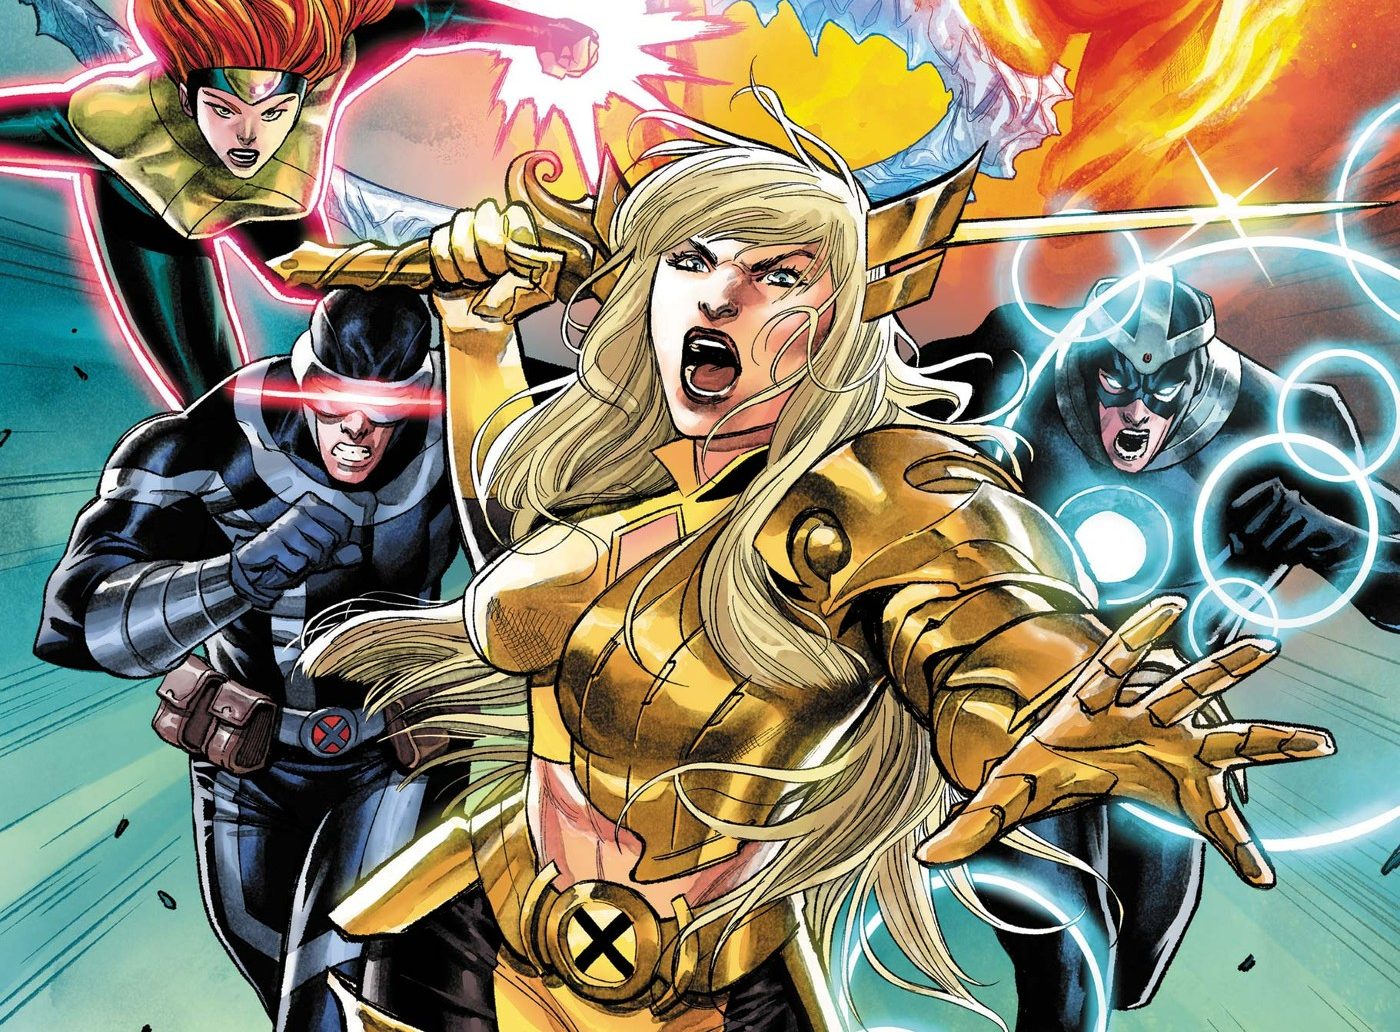 'X-Men' #17 is a testament to heroic humility